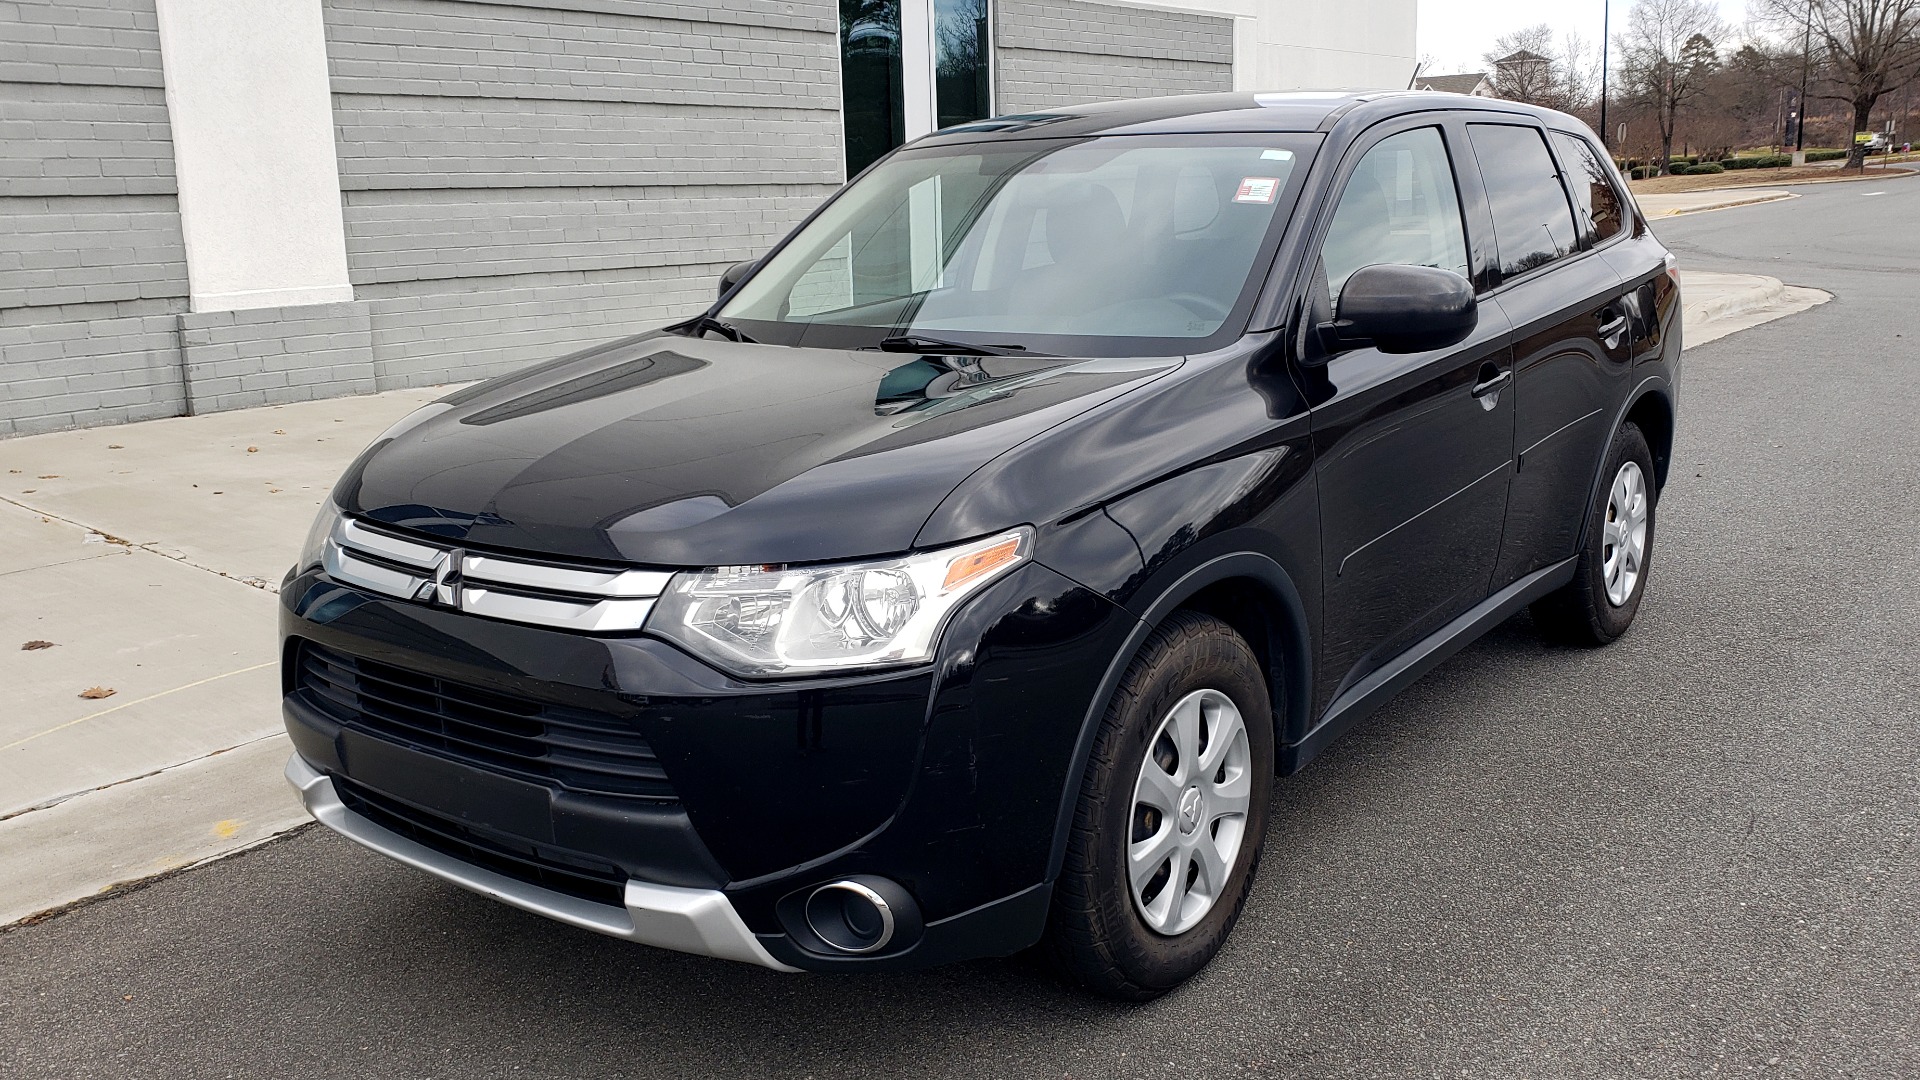 Used 2015 Mitsubishi OUTLANDER ES 2.4L SUV / CVT / FWD / KEYLESS ENTRY / 16-IN WHEELS for sale Sold at Formula Imports in Charlotte NC 28227 1